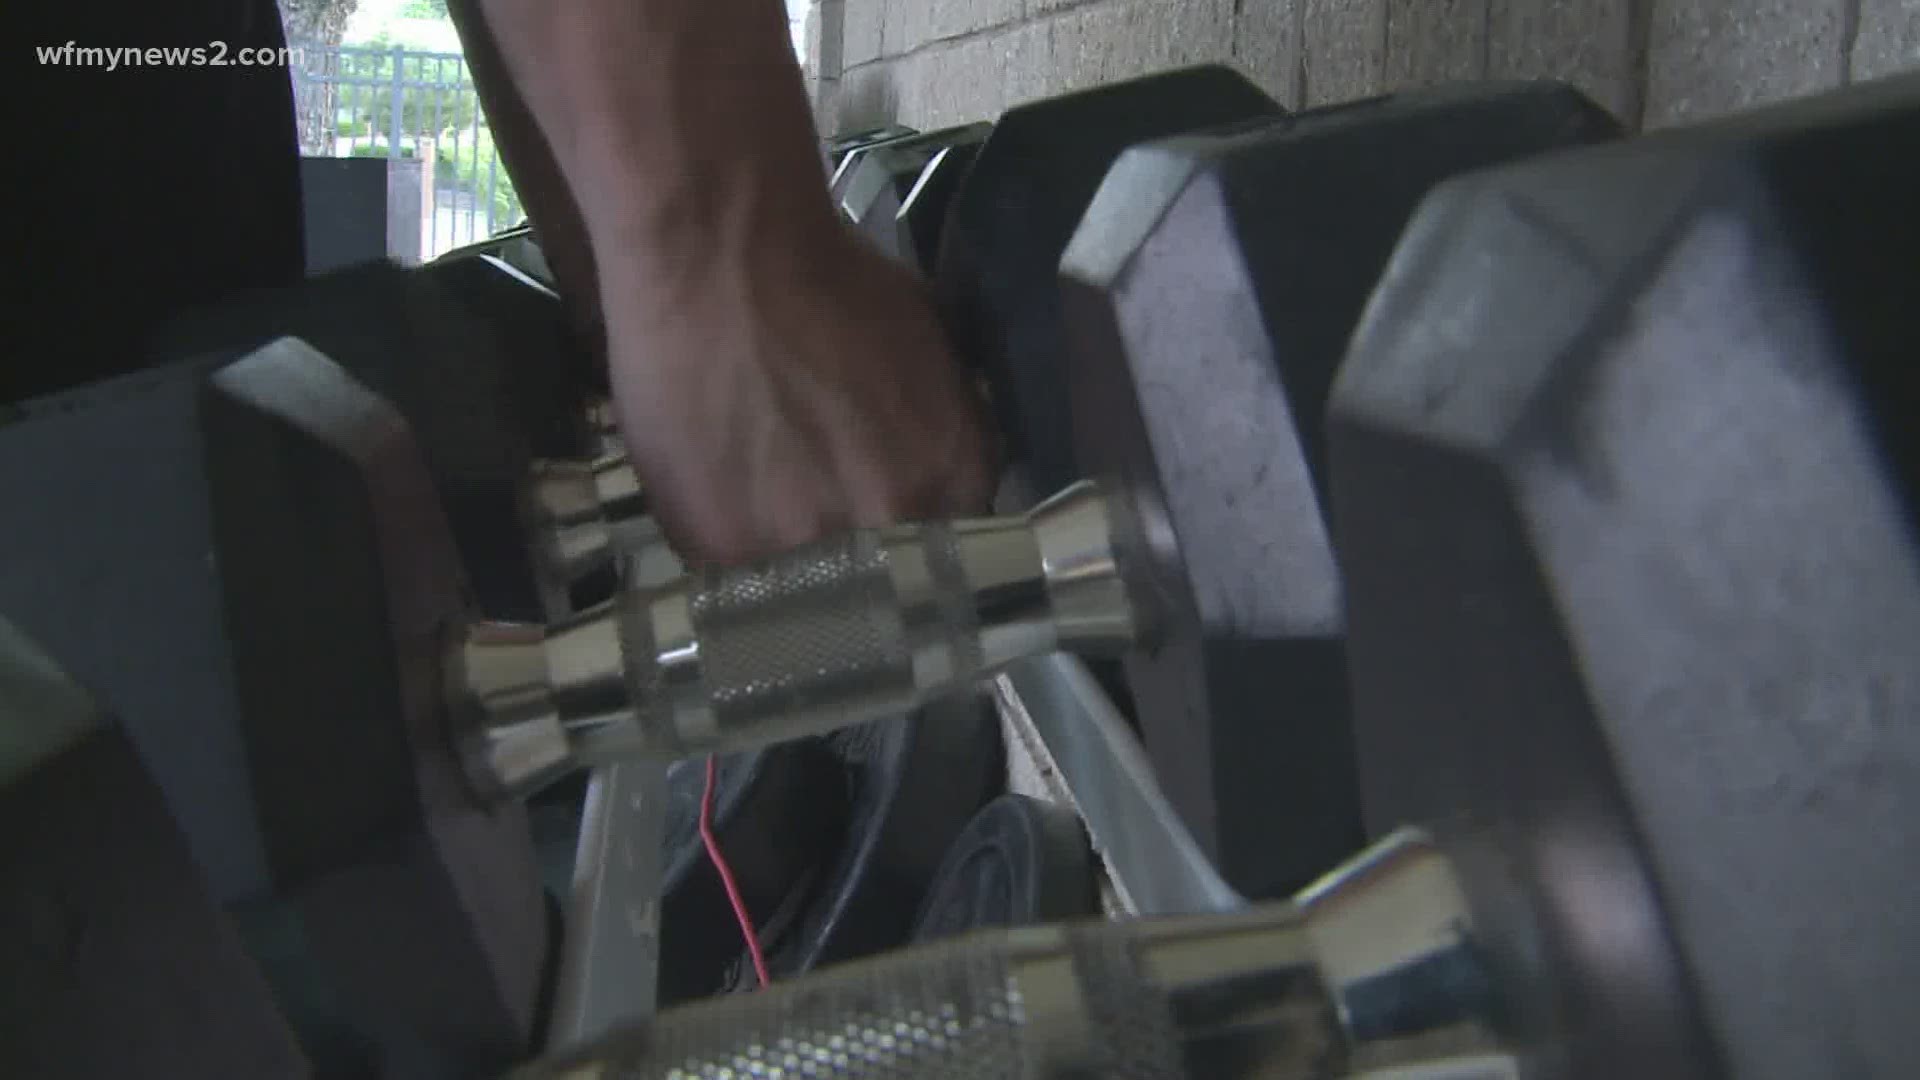 Some gyms and fitness centers have reopened to those who are told to exercise by a medical professional